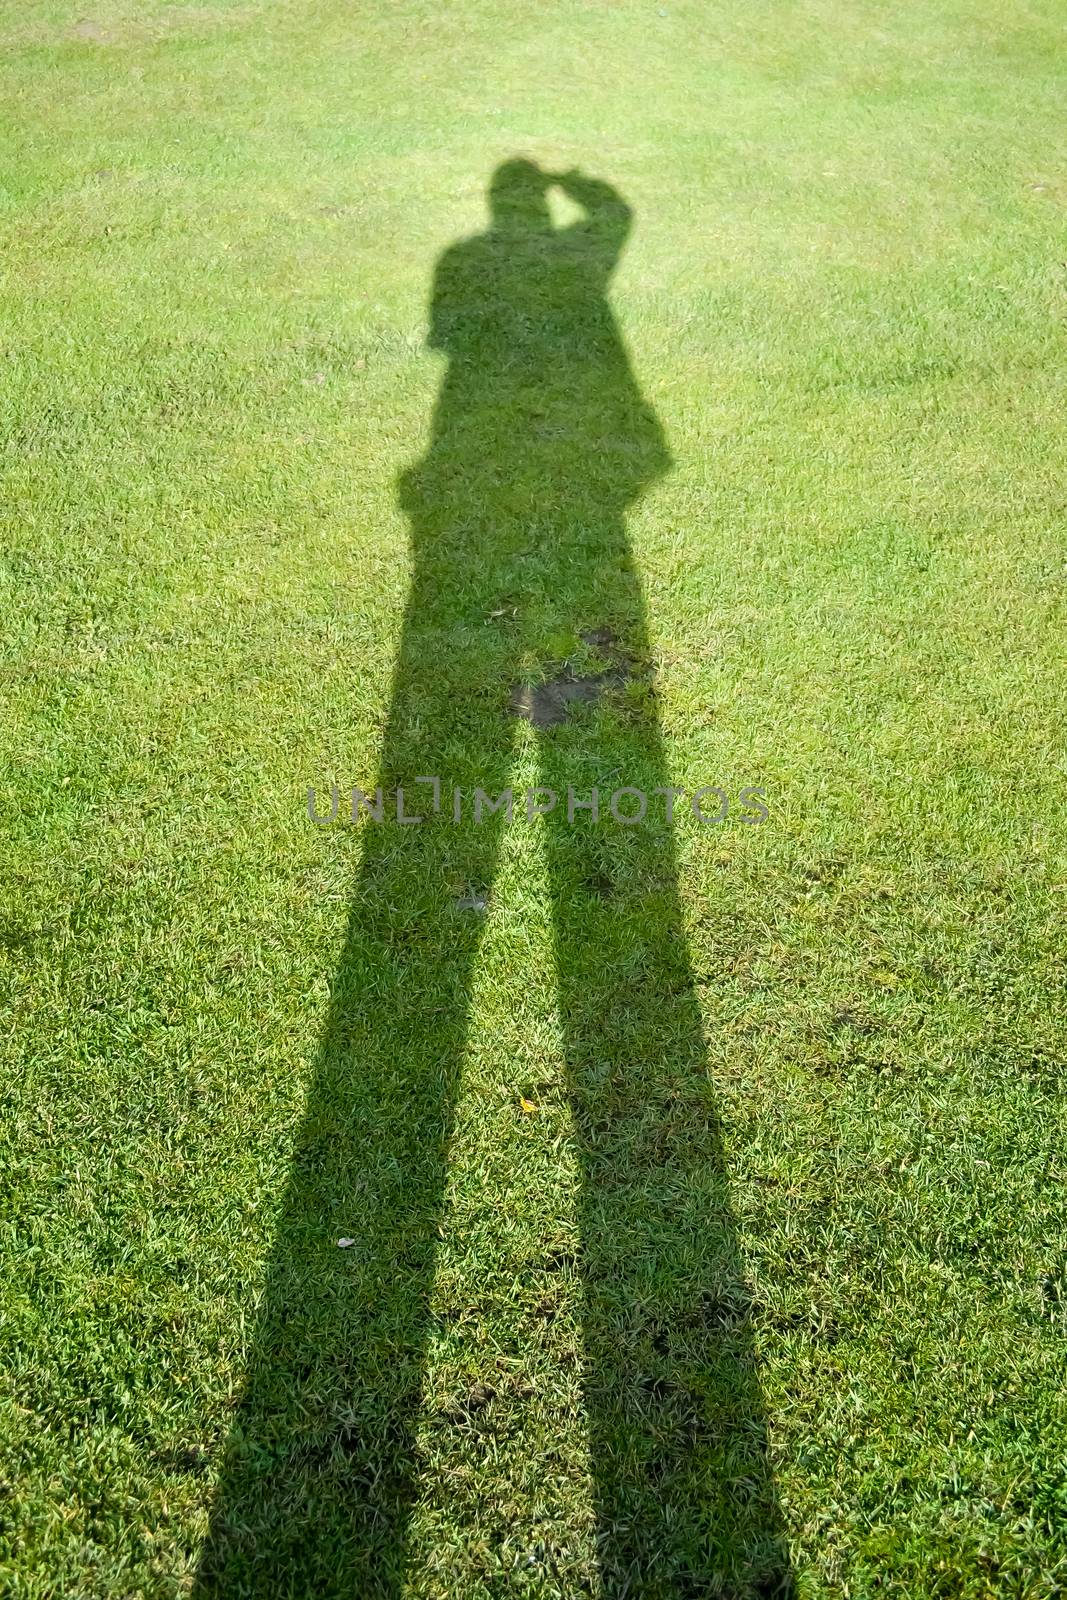 Shadow of a man on a background of green grass illustrates the concept of a photographer. by sudiptabhowmick